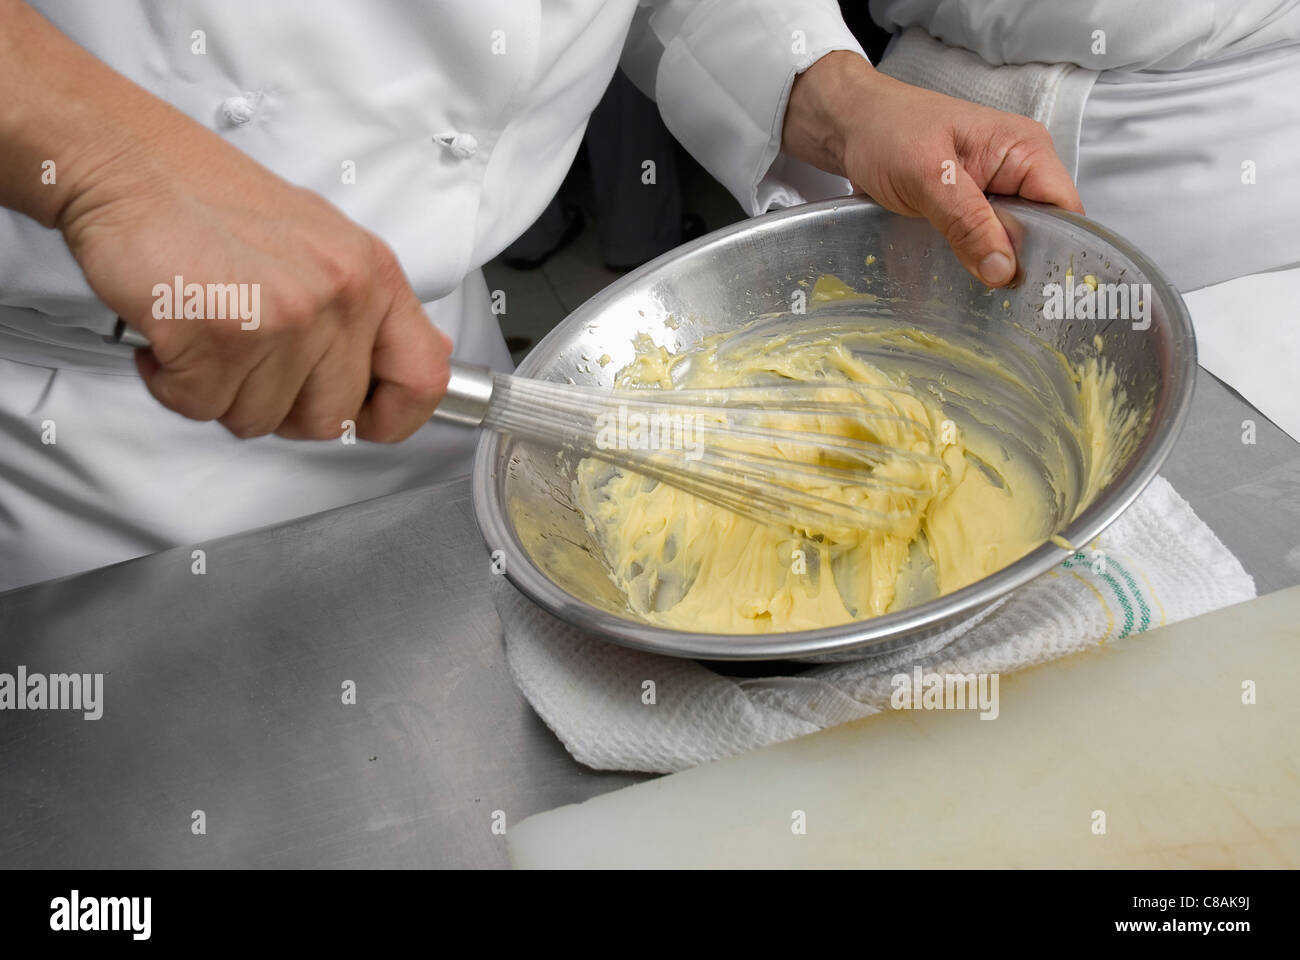 Cook whipping a preparation Stock Photo